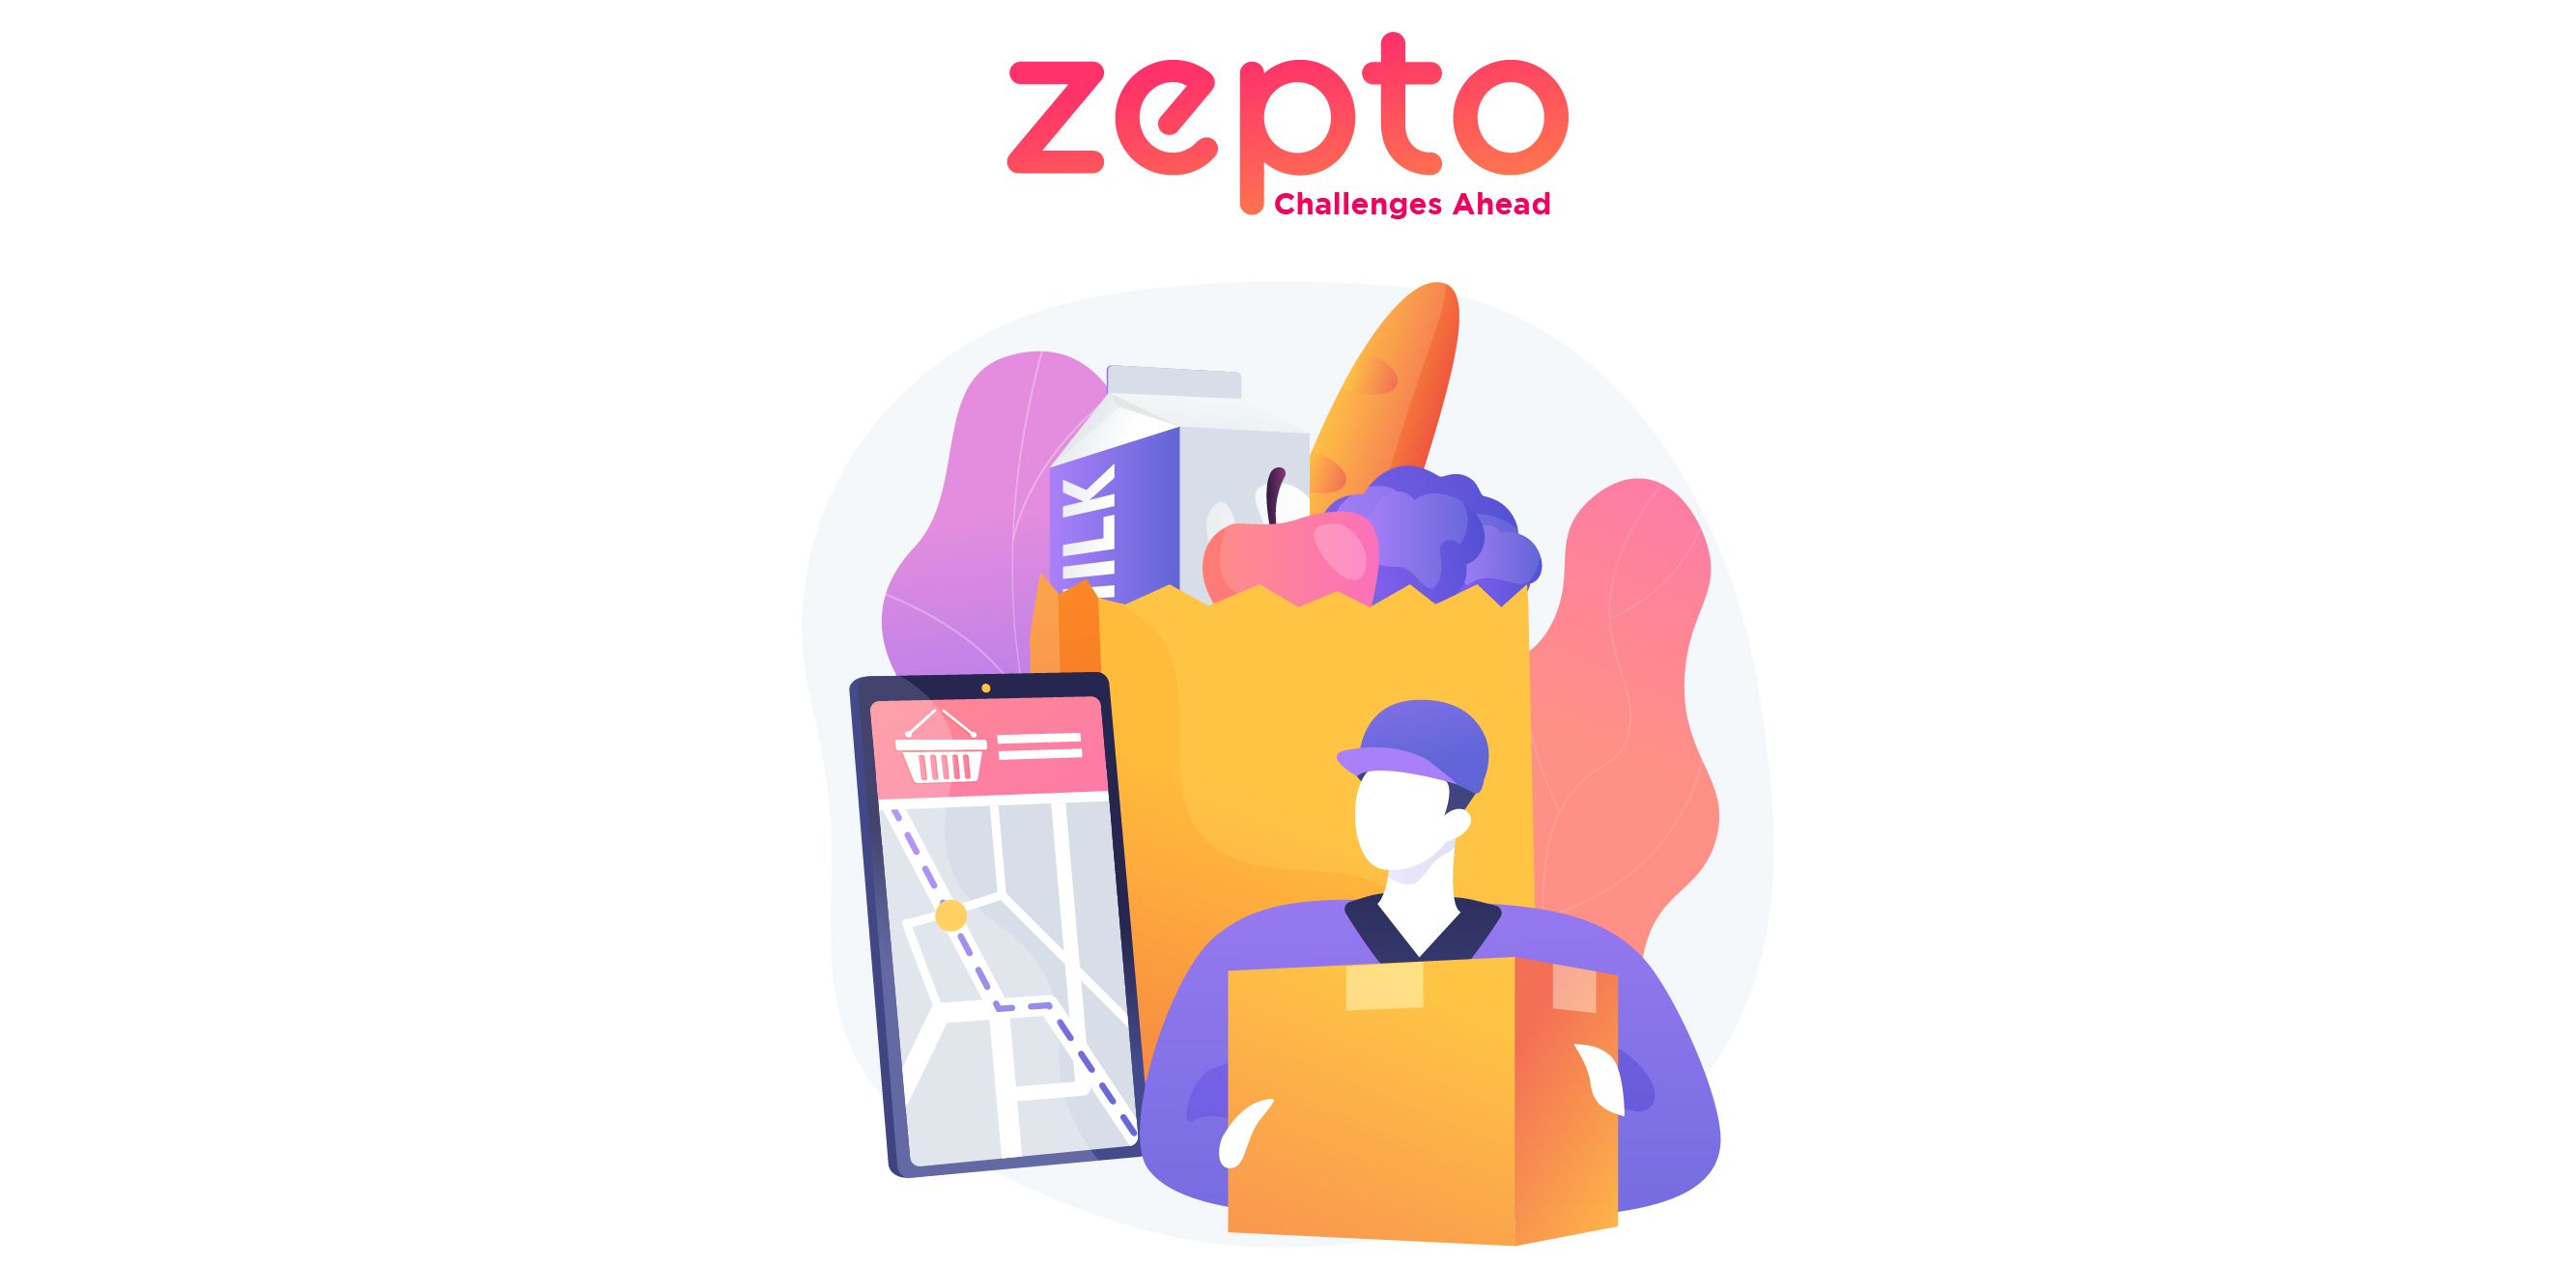 What are the challenges ahead of Zepto?